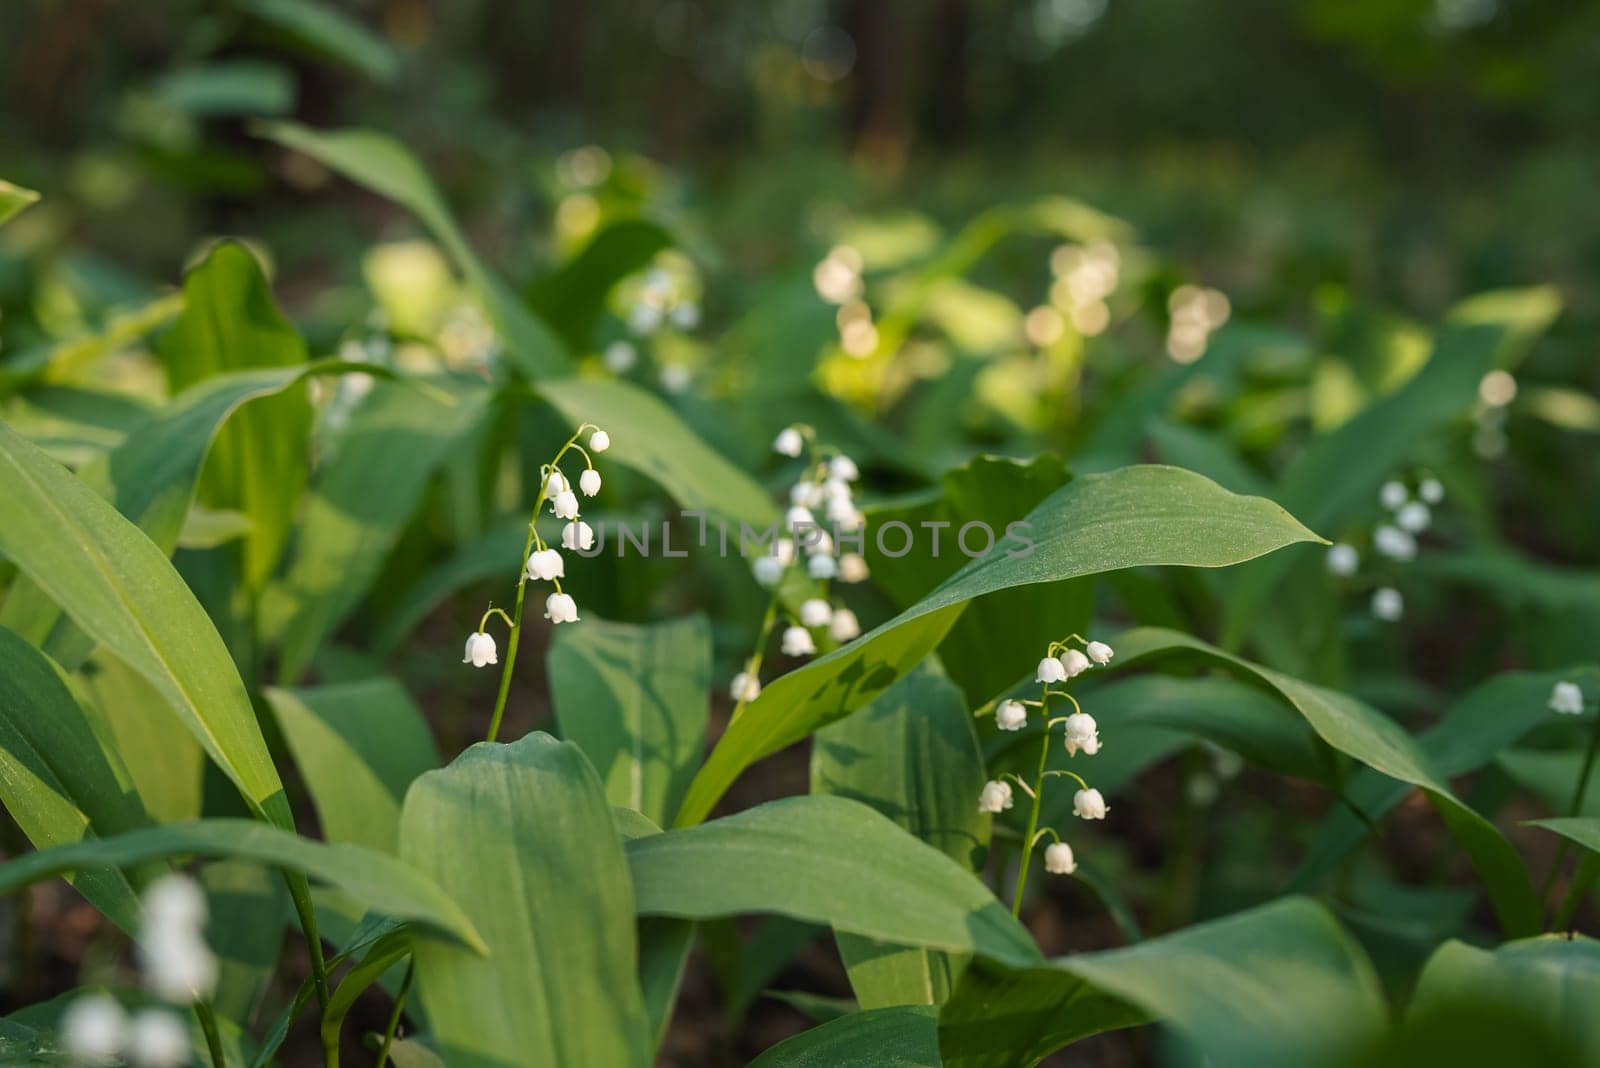 Sunbeam illuminating blooming lily of the valley in forest by VitaliiPetrushenko